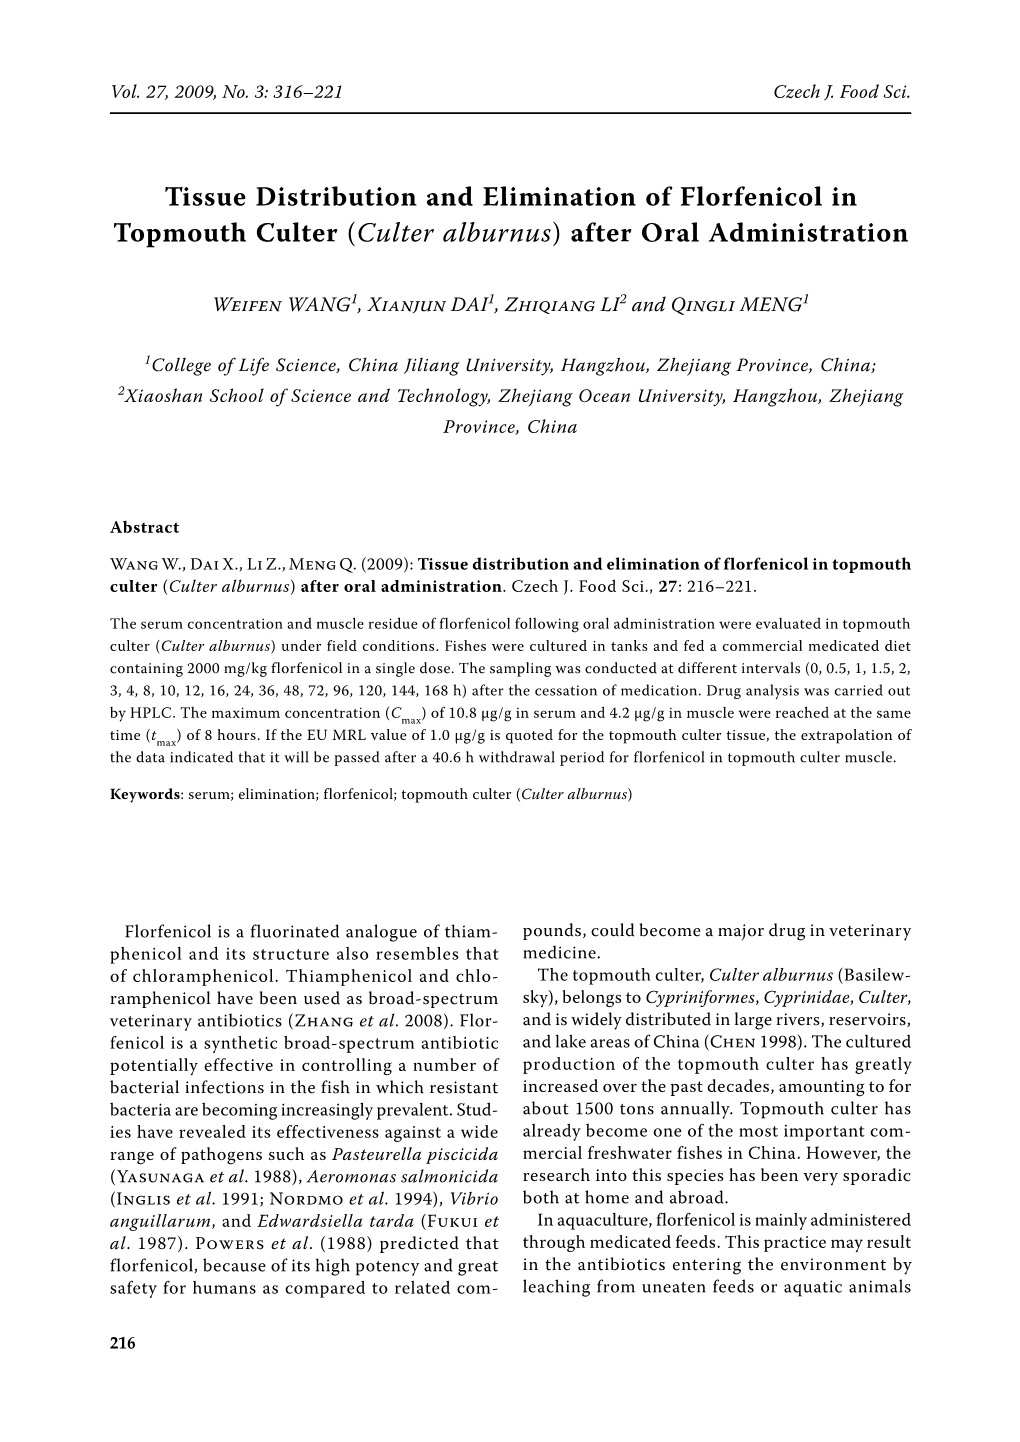 Tissue Distribution and Elimination of Florfenicol in Topmouth Culter (Culter Alburnus) After Oral Administration